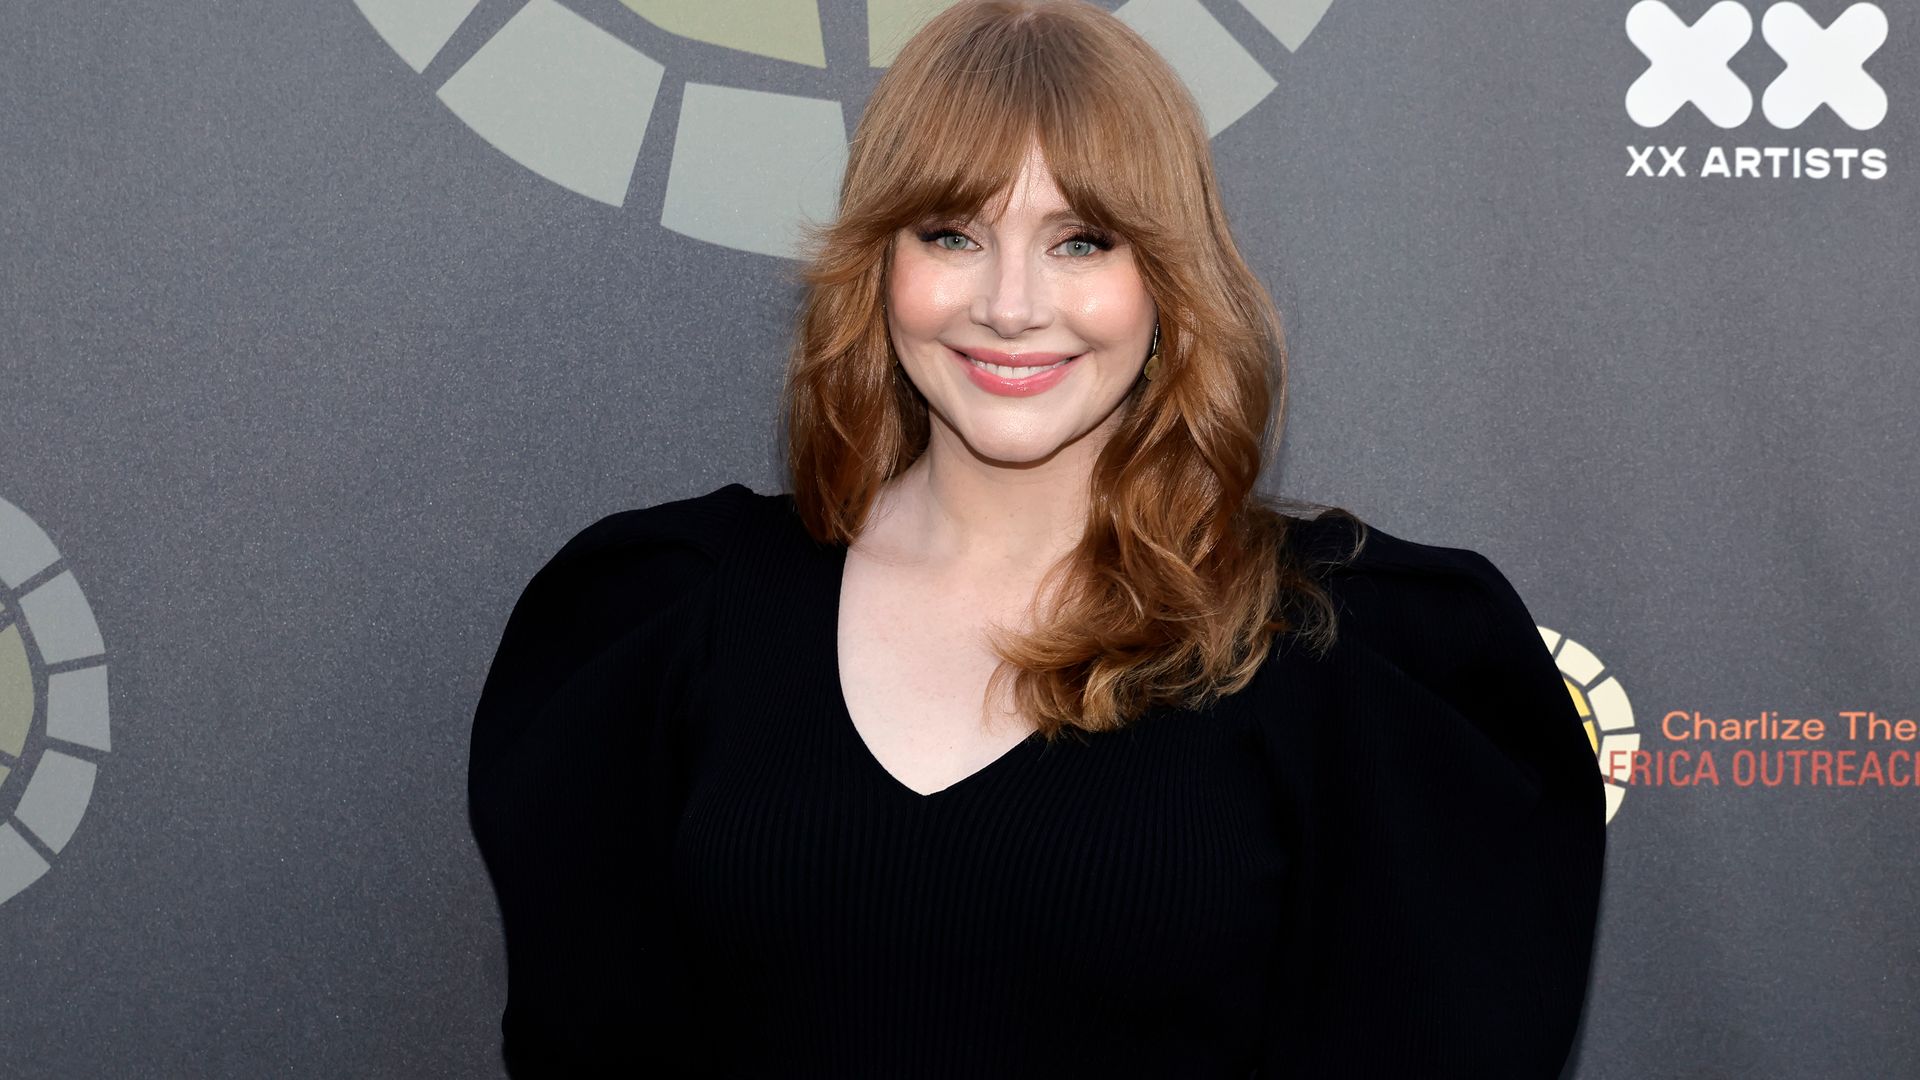 UNIVERSAL CITY, CALIFORNIA - JUNE 11: Bryce Dallas Howard attends the Charlize Theron Africa Outreach Project 2022 Summer Block Party at Universal Studios Backlot on June 11, 2022 in Universal City, California. (Photo by Kevin Winter/Getty Images)